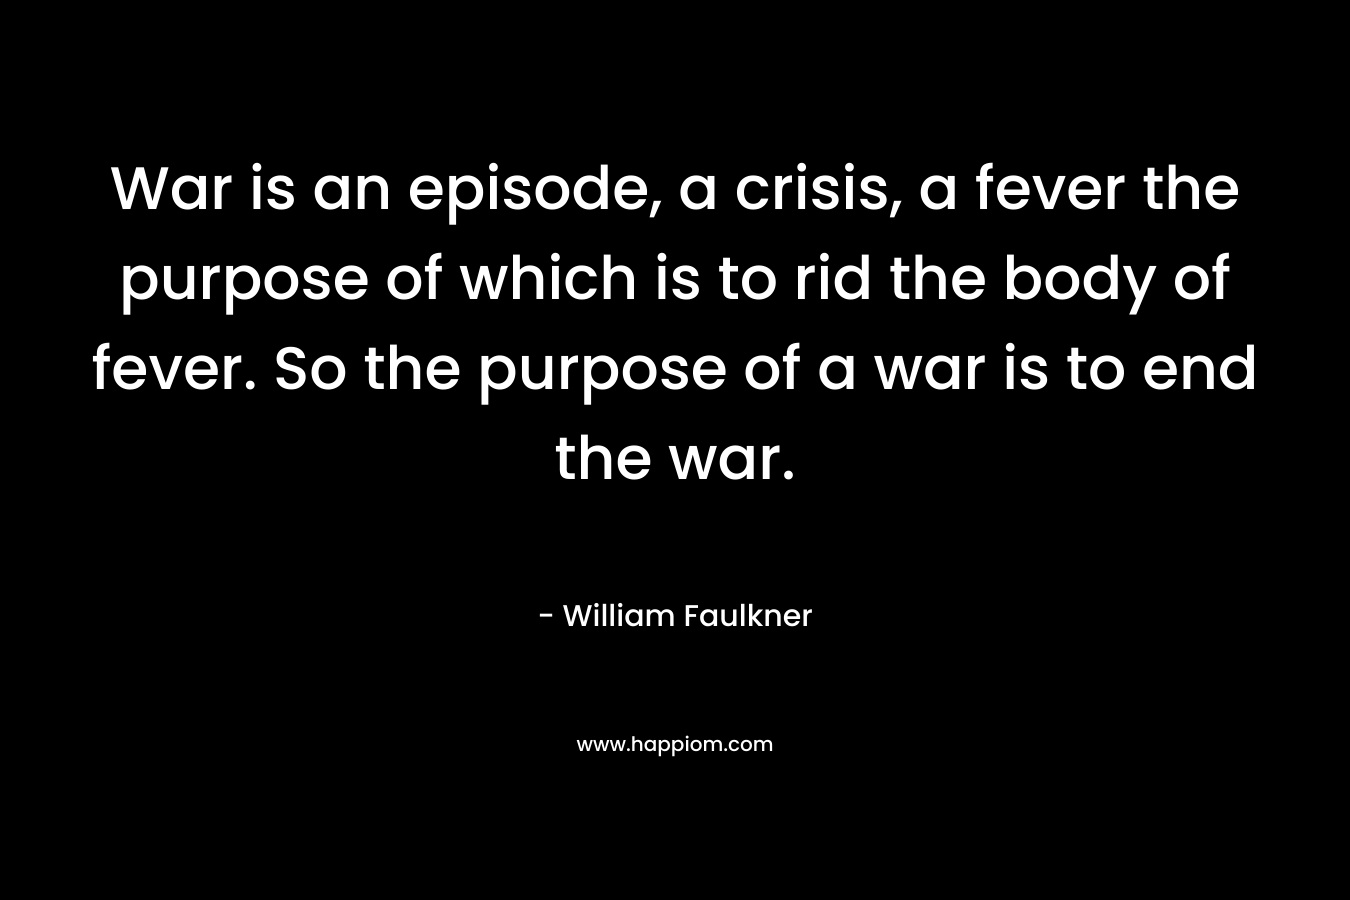 War is an episode, a crisis, a fever the purpose of which is to rid the body of fever. So the purpose of a war is to end the war.